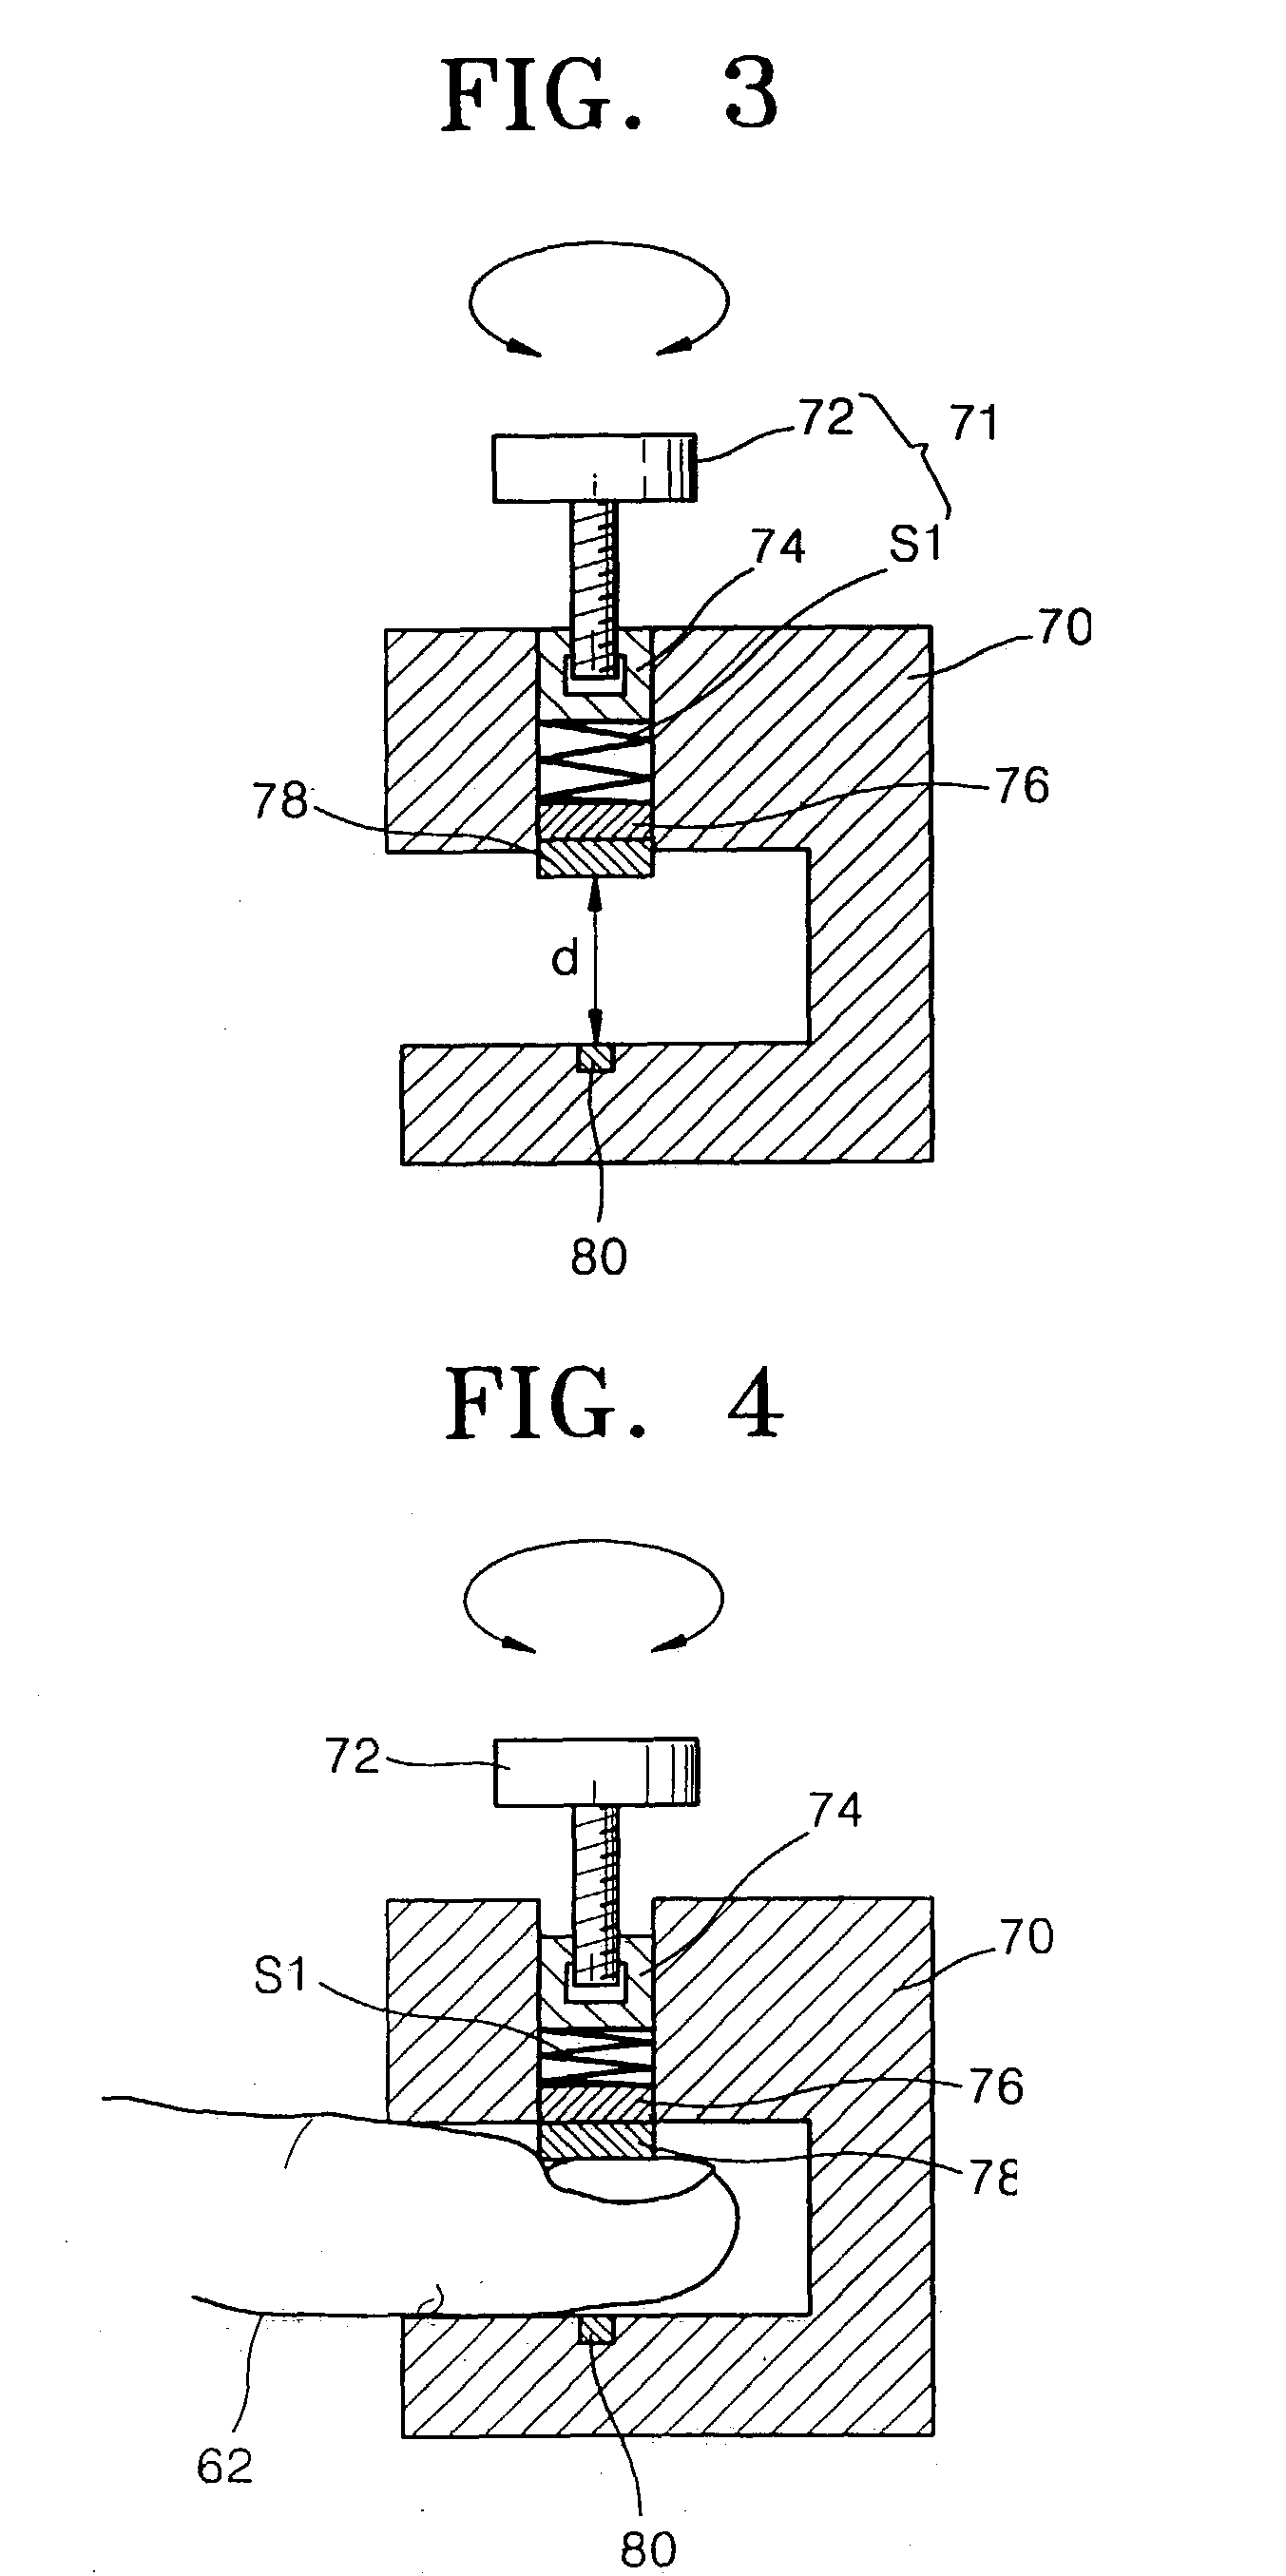 Probe for use in measuring a biological signal and biological signal measuring system incorporating the probe